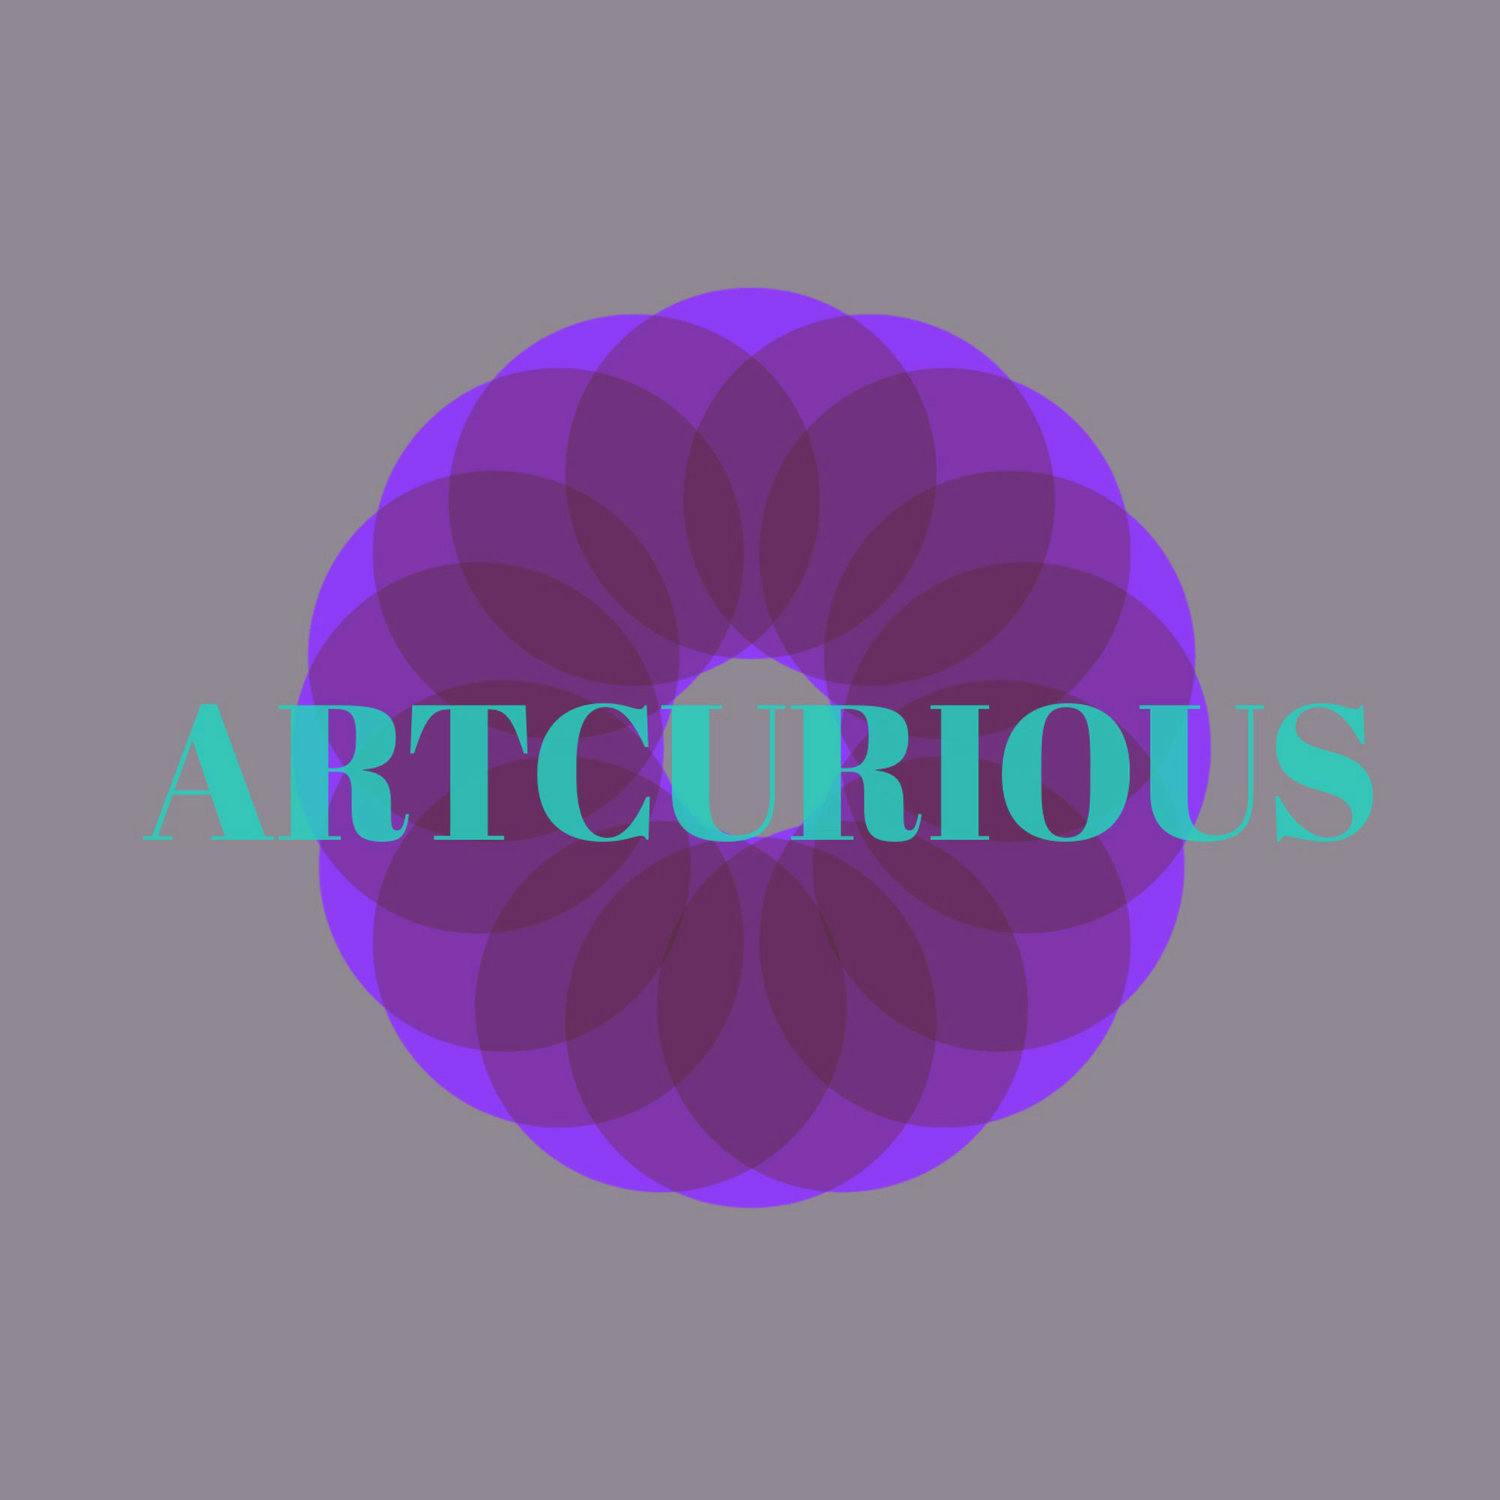 Announcements from ArtCurious!